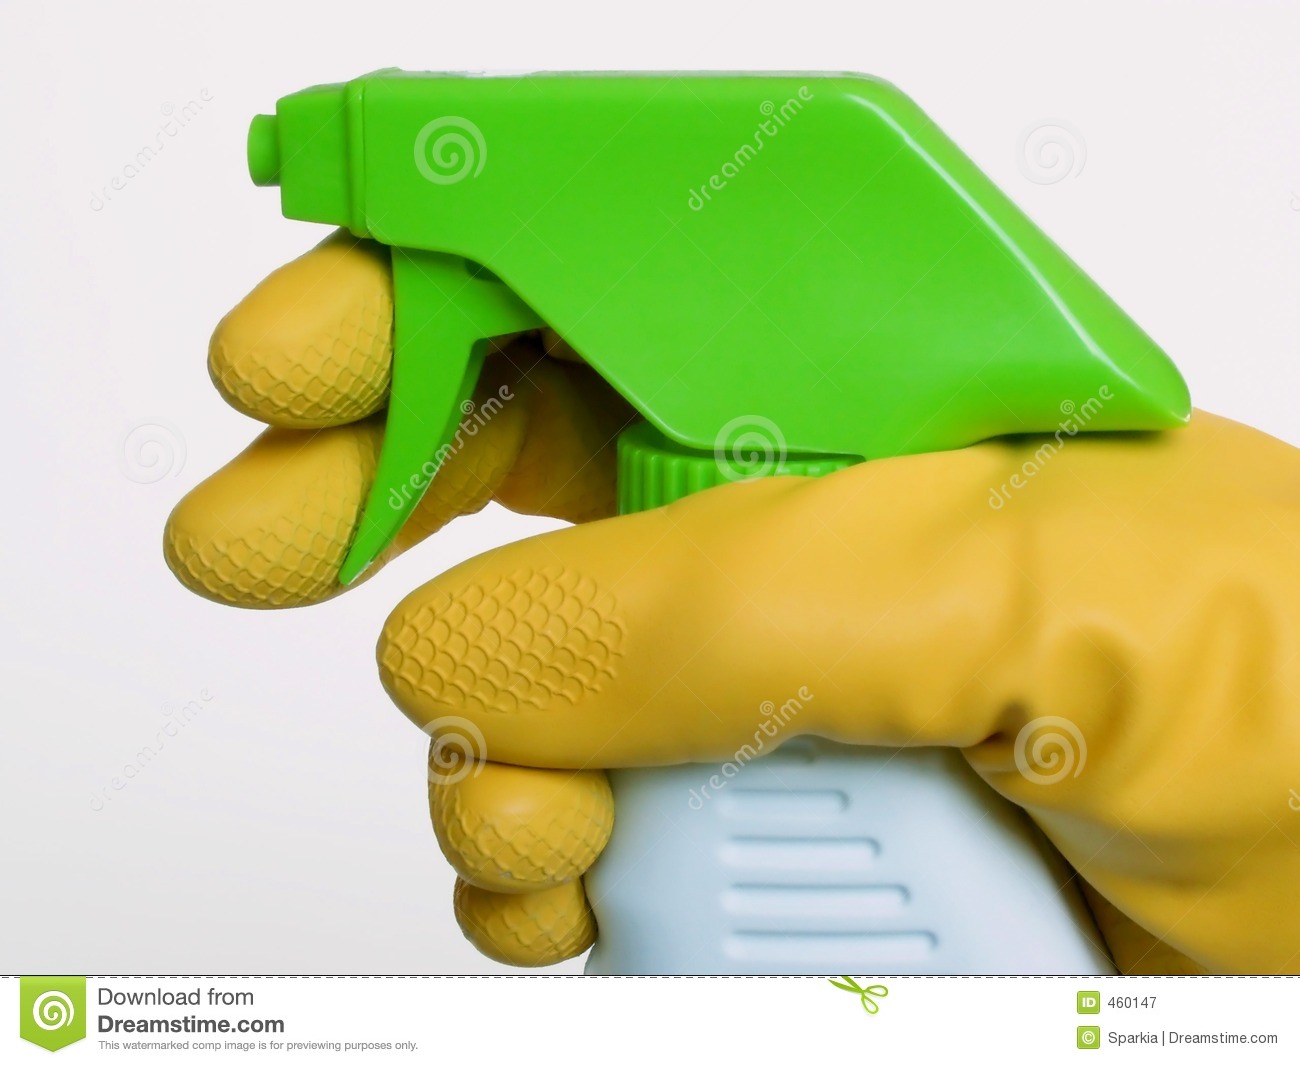 Spray Bottle Cleaner Royalty Free Stock Photography   Image  460147